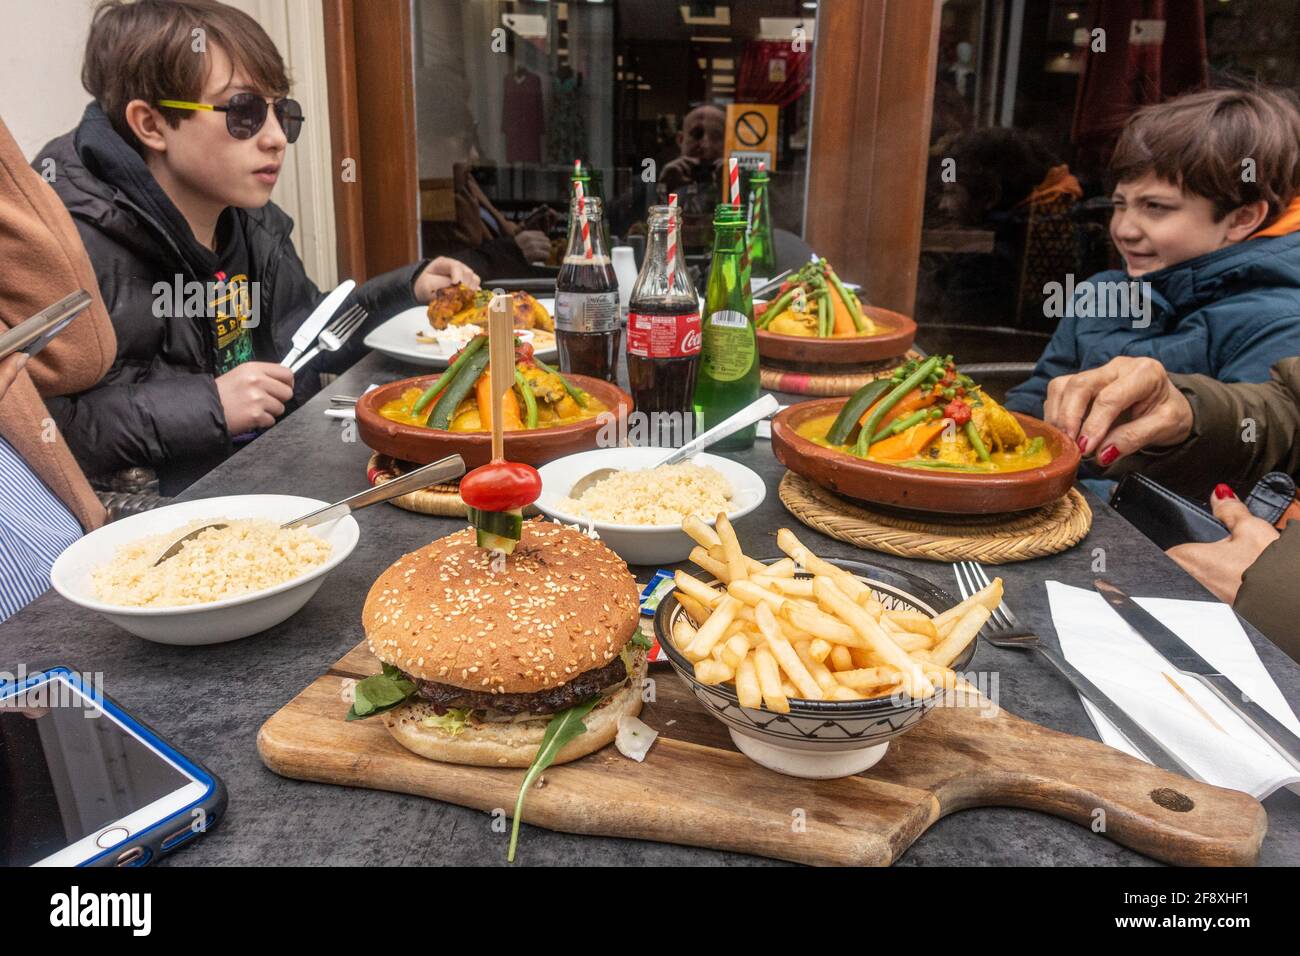 A family enjoy a mean at a restaurant for the first time since the lockdown bought about because of coronavirus. Eating outside as per current rules. Stock Photo